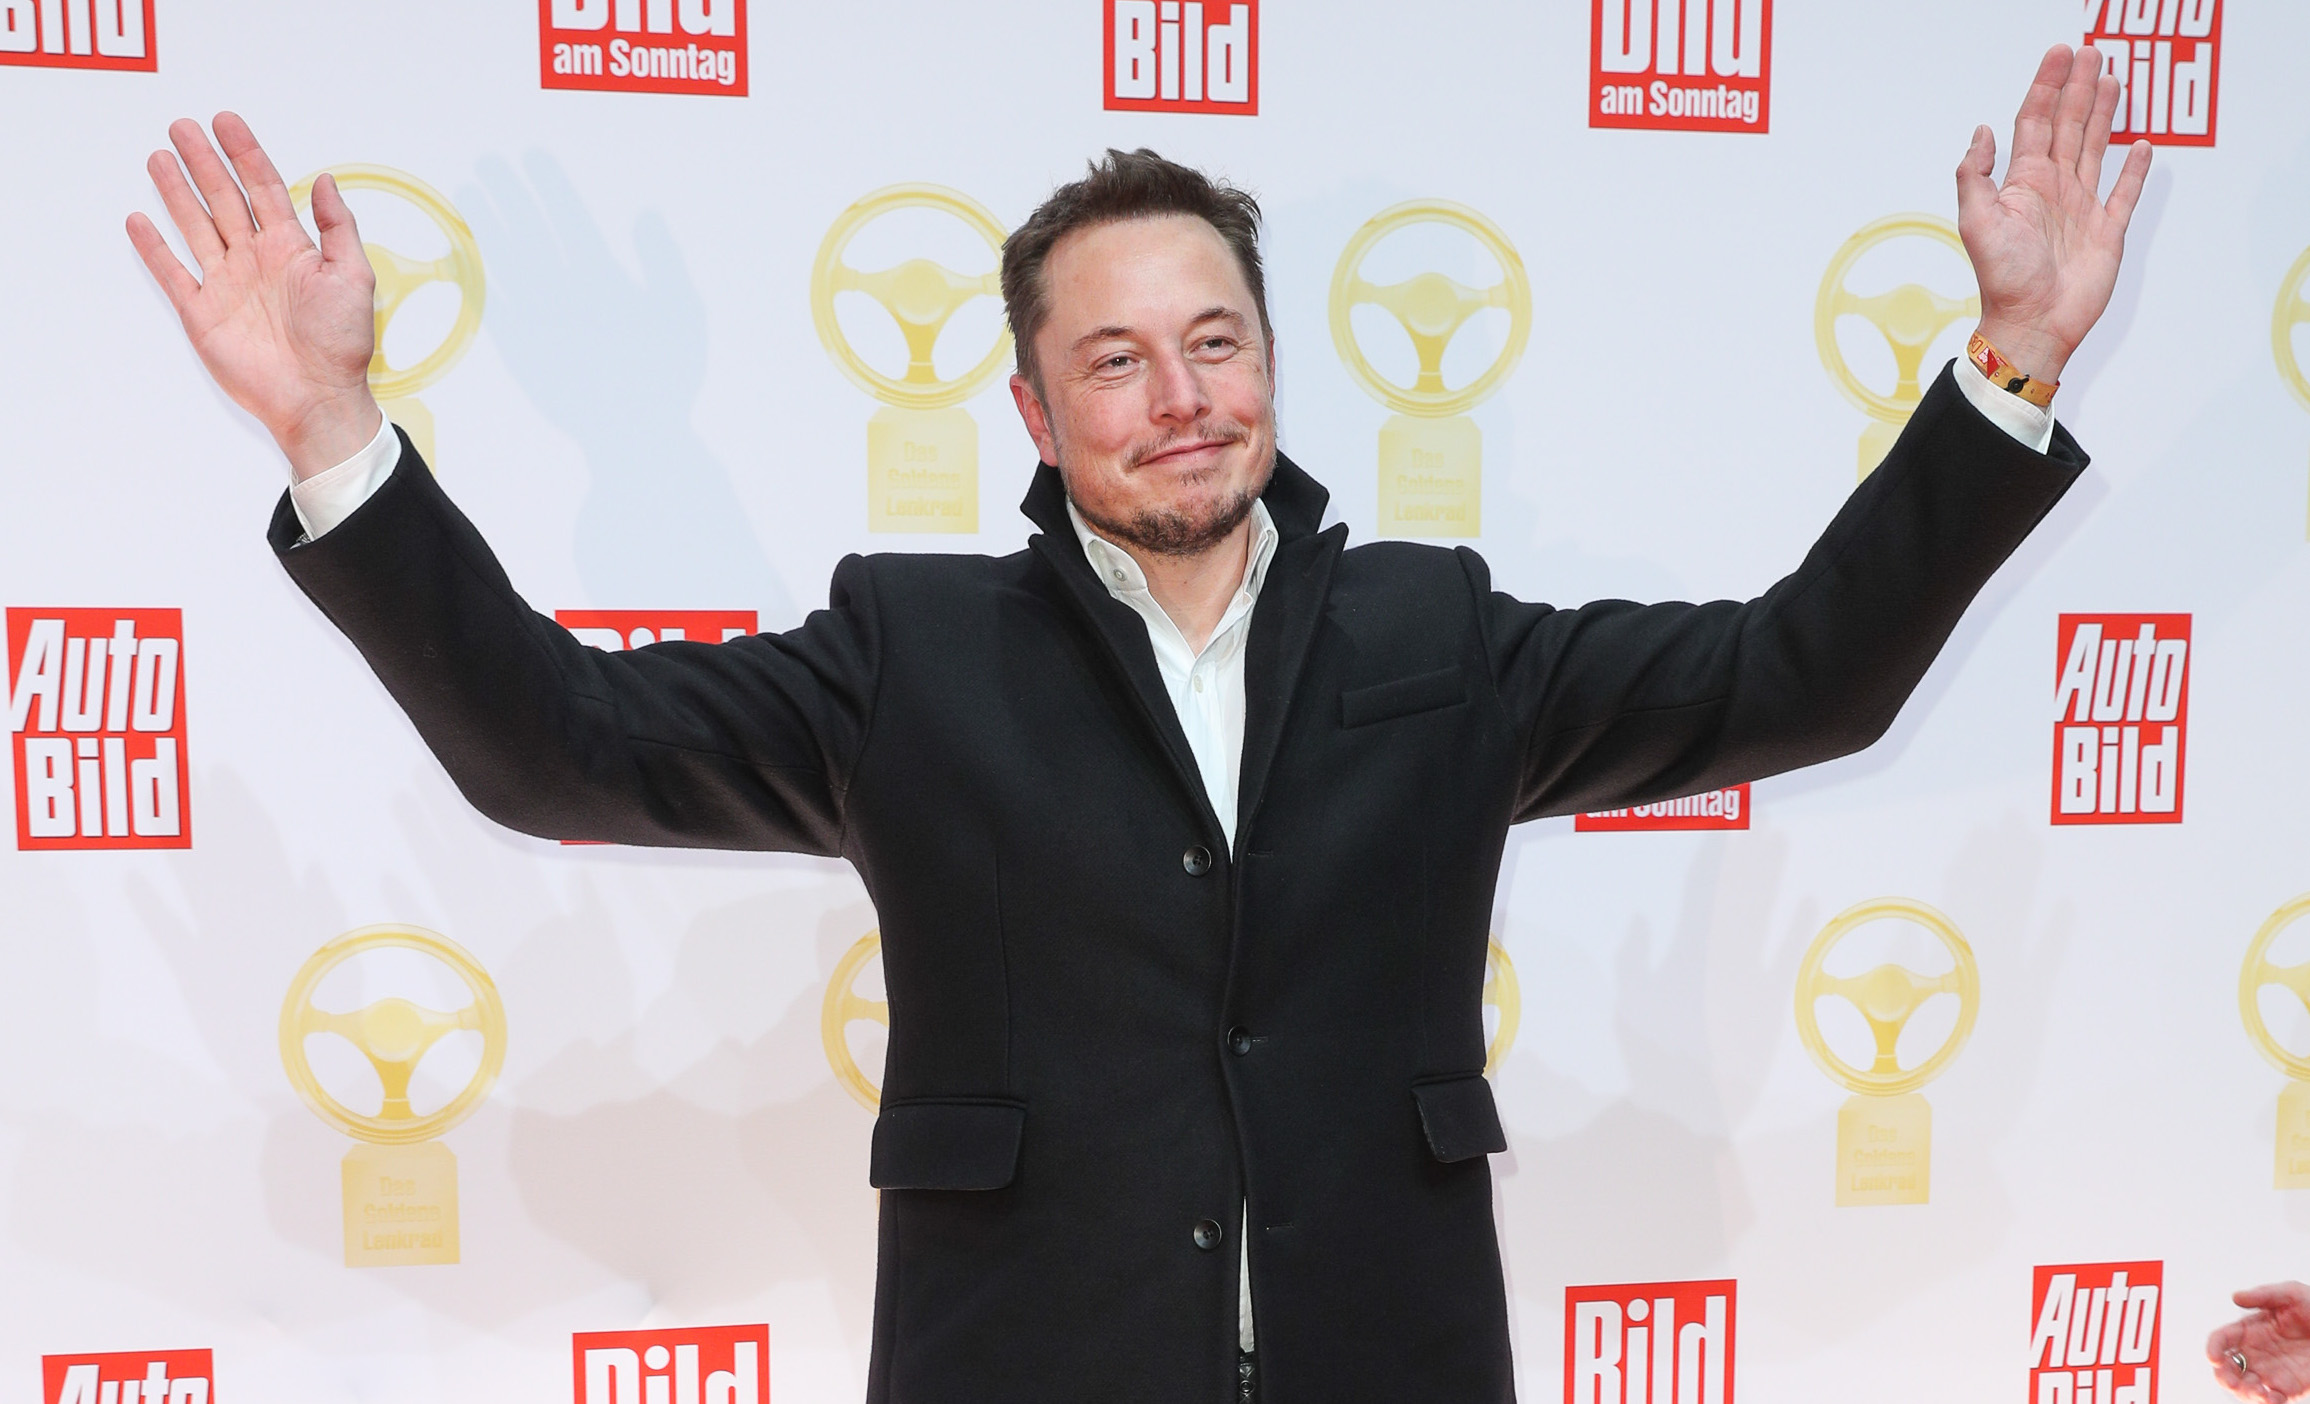 Elon Musk poses with his arms raised.